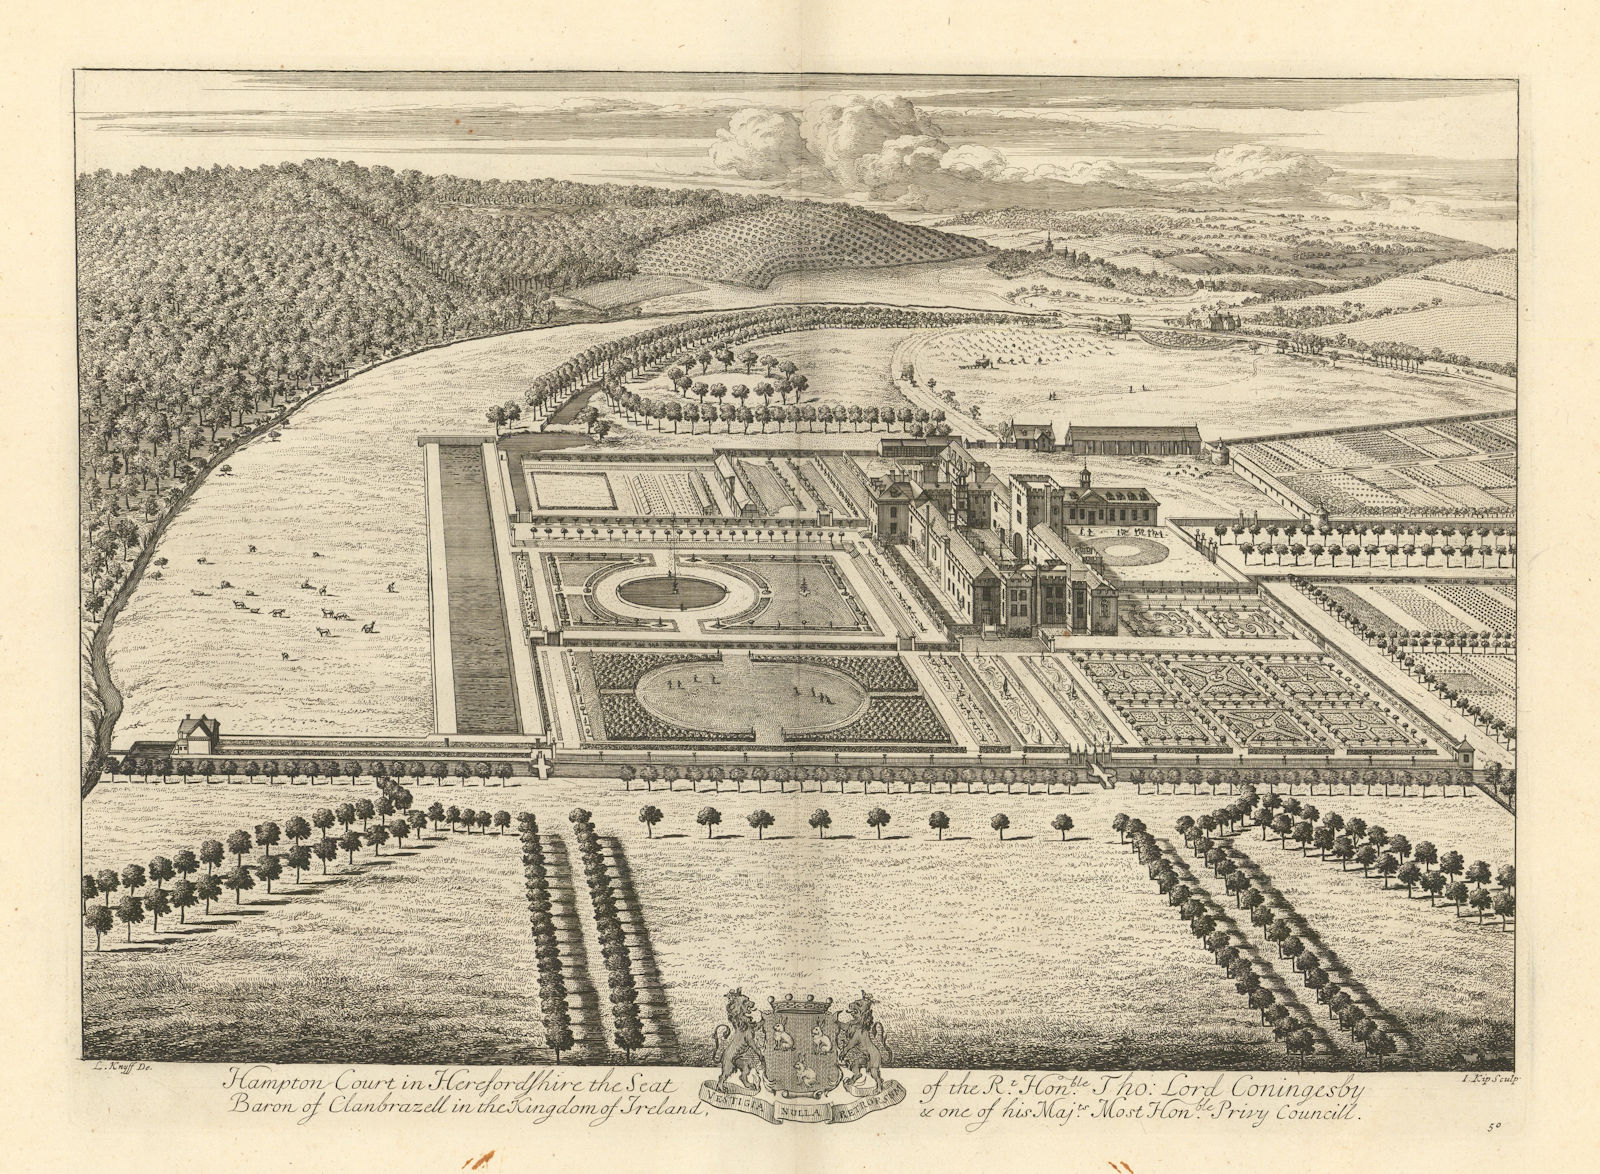 Hampton Court Castle, Hope under Dinmore by Kip & Knyff. Herefordshire 1709